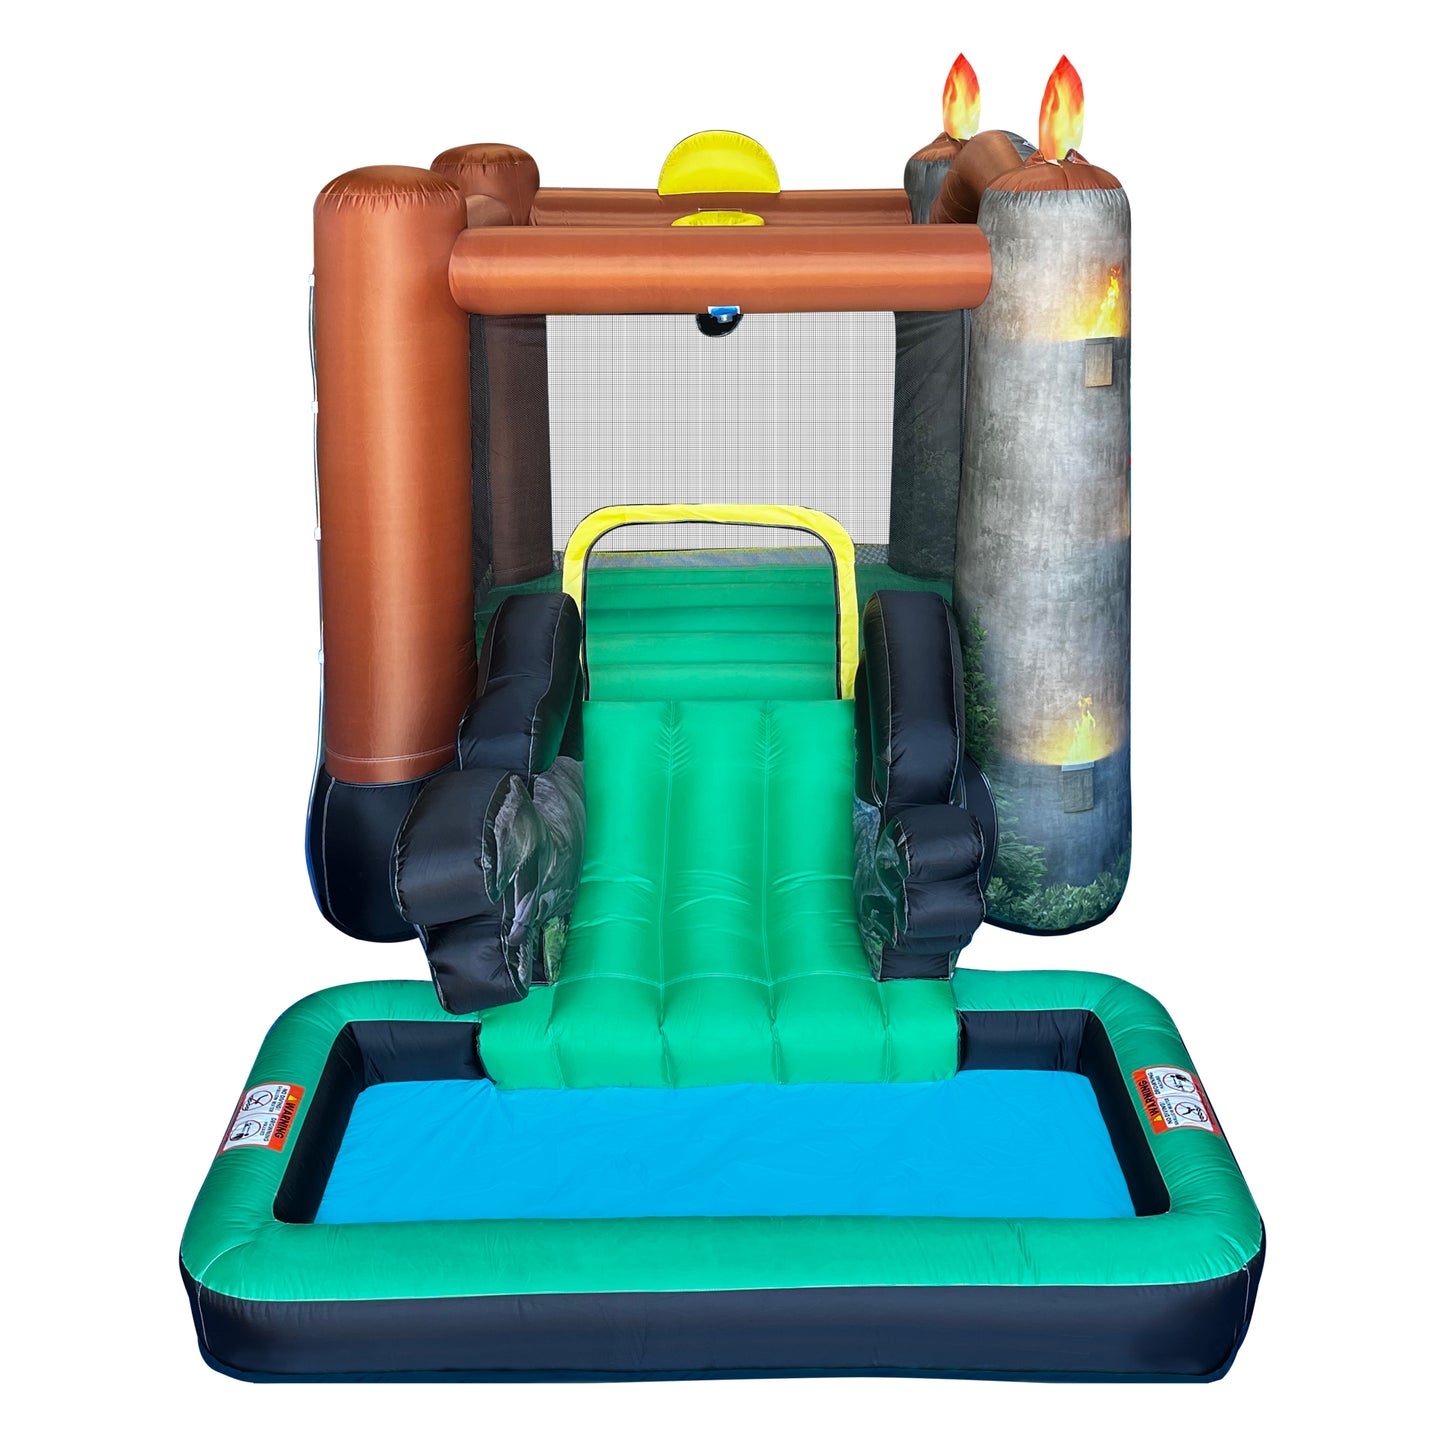 Jurassic World Bounce House Water Slide with Pool